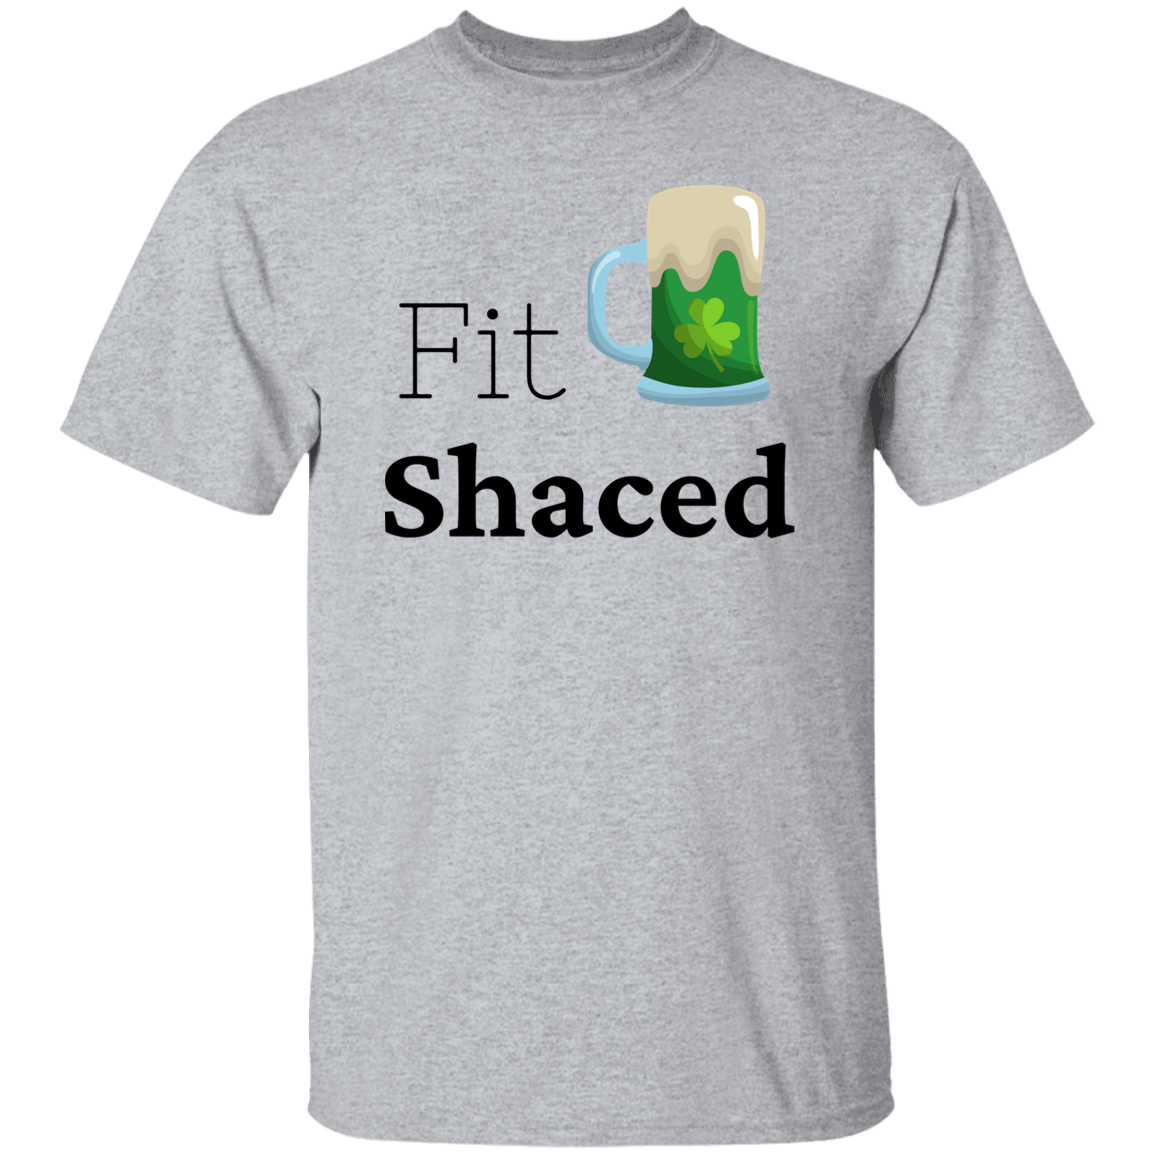 Fit Shaced T-Shirt